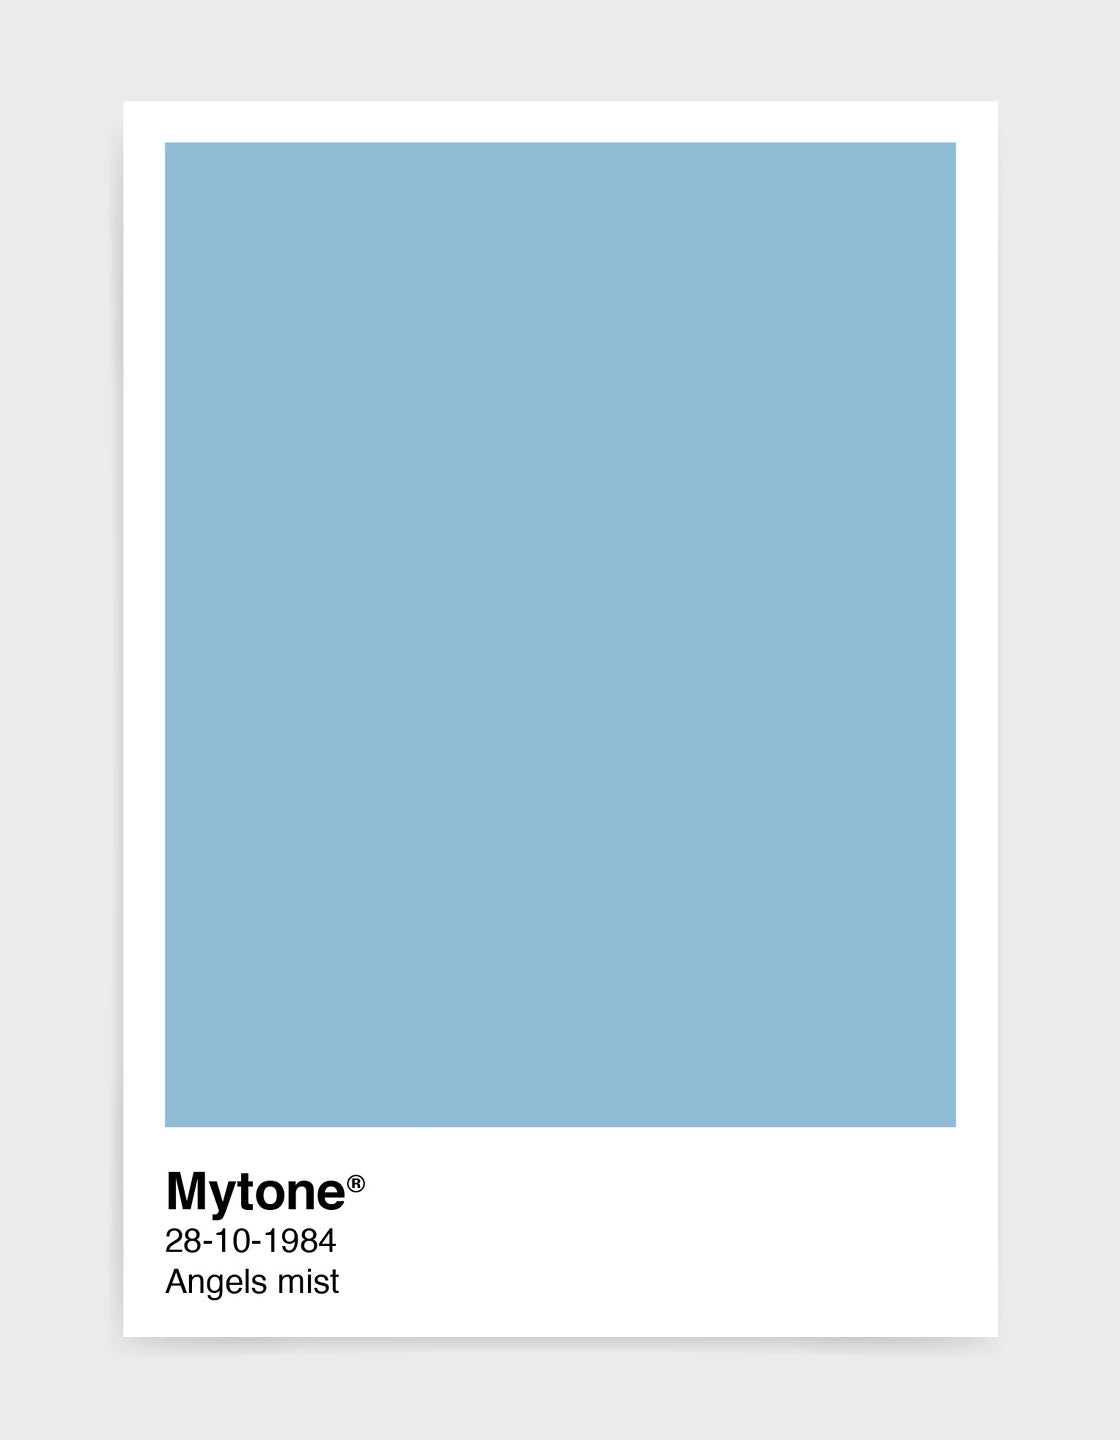 Pantone style art print with custom colour and text image shows light blue print